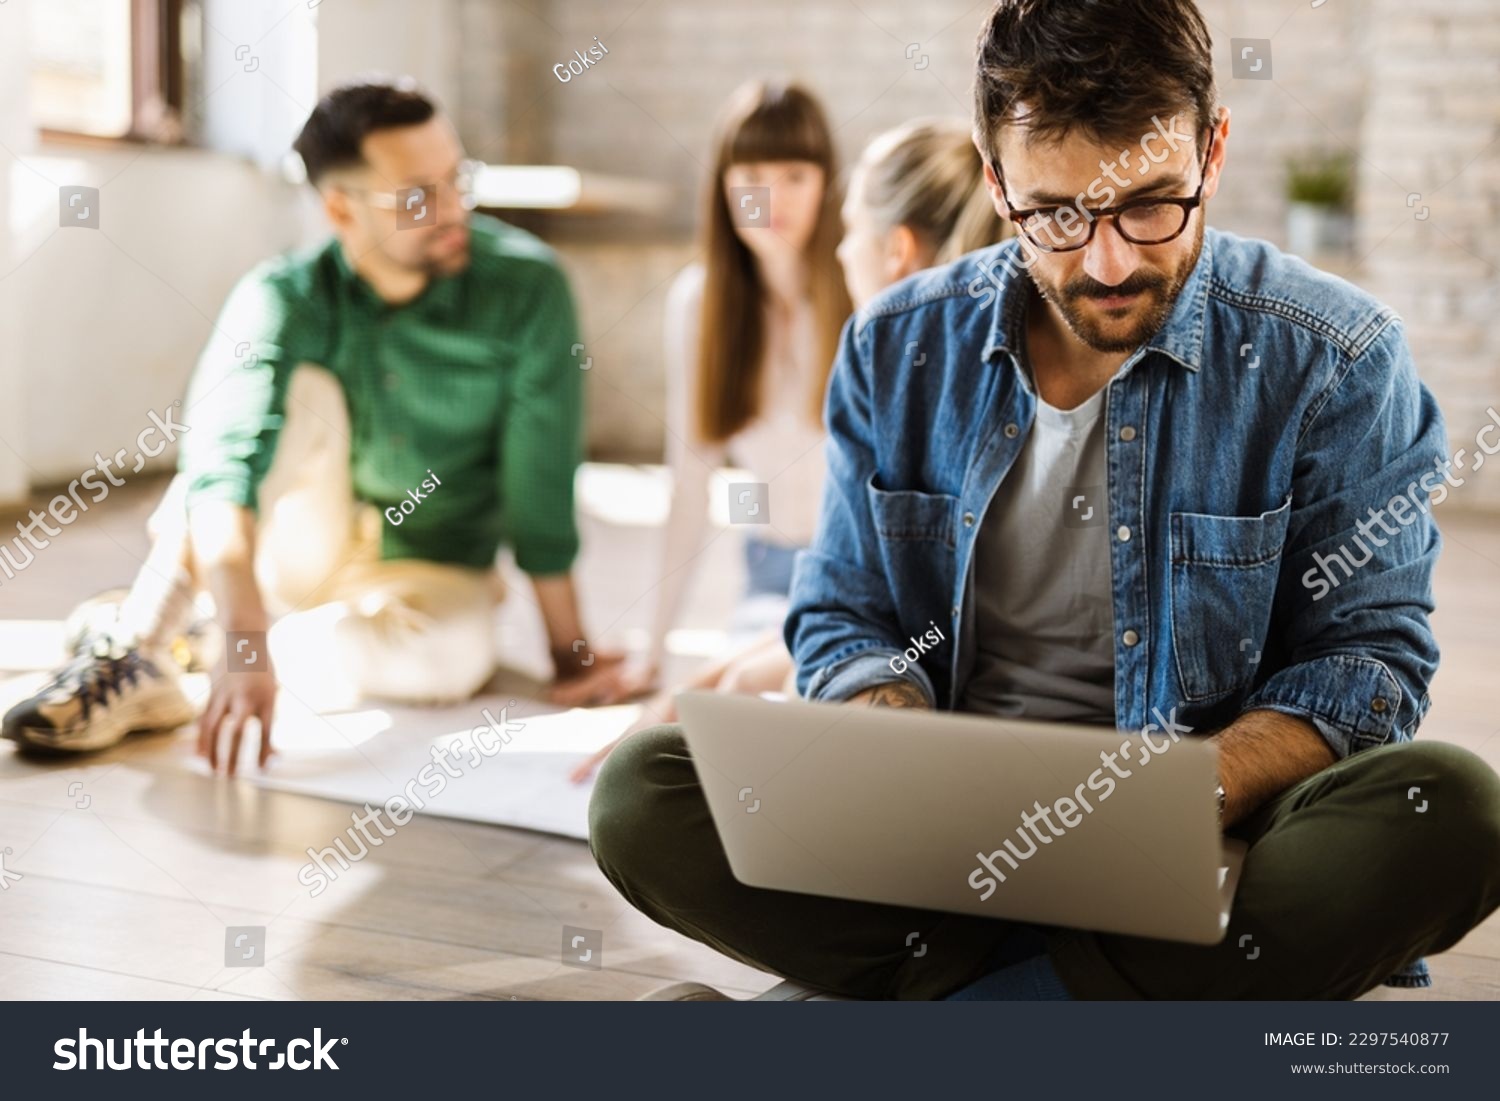 Young enterpreneur using computer while sitting on the floor in the office. There are people in the background #2297540877